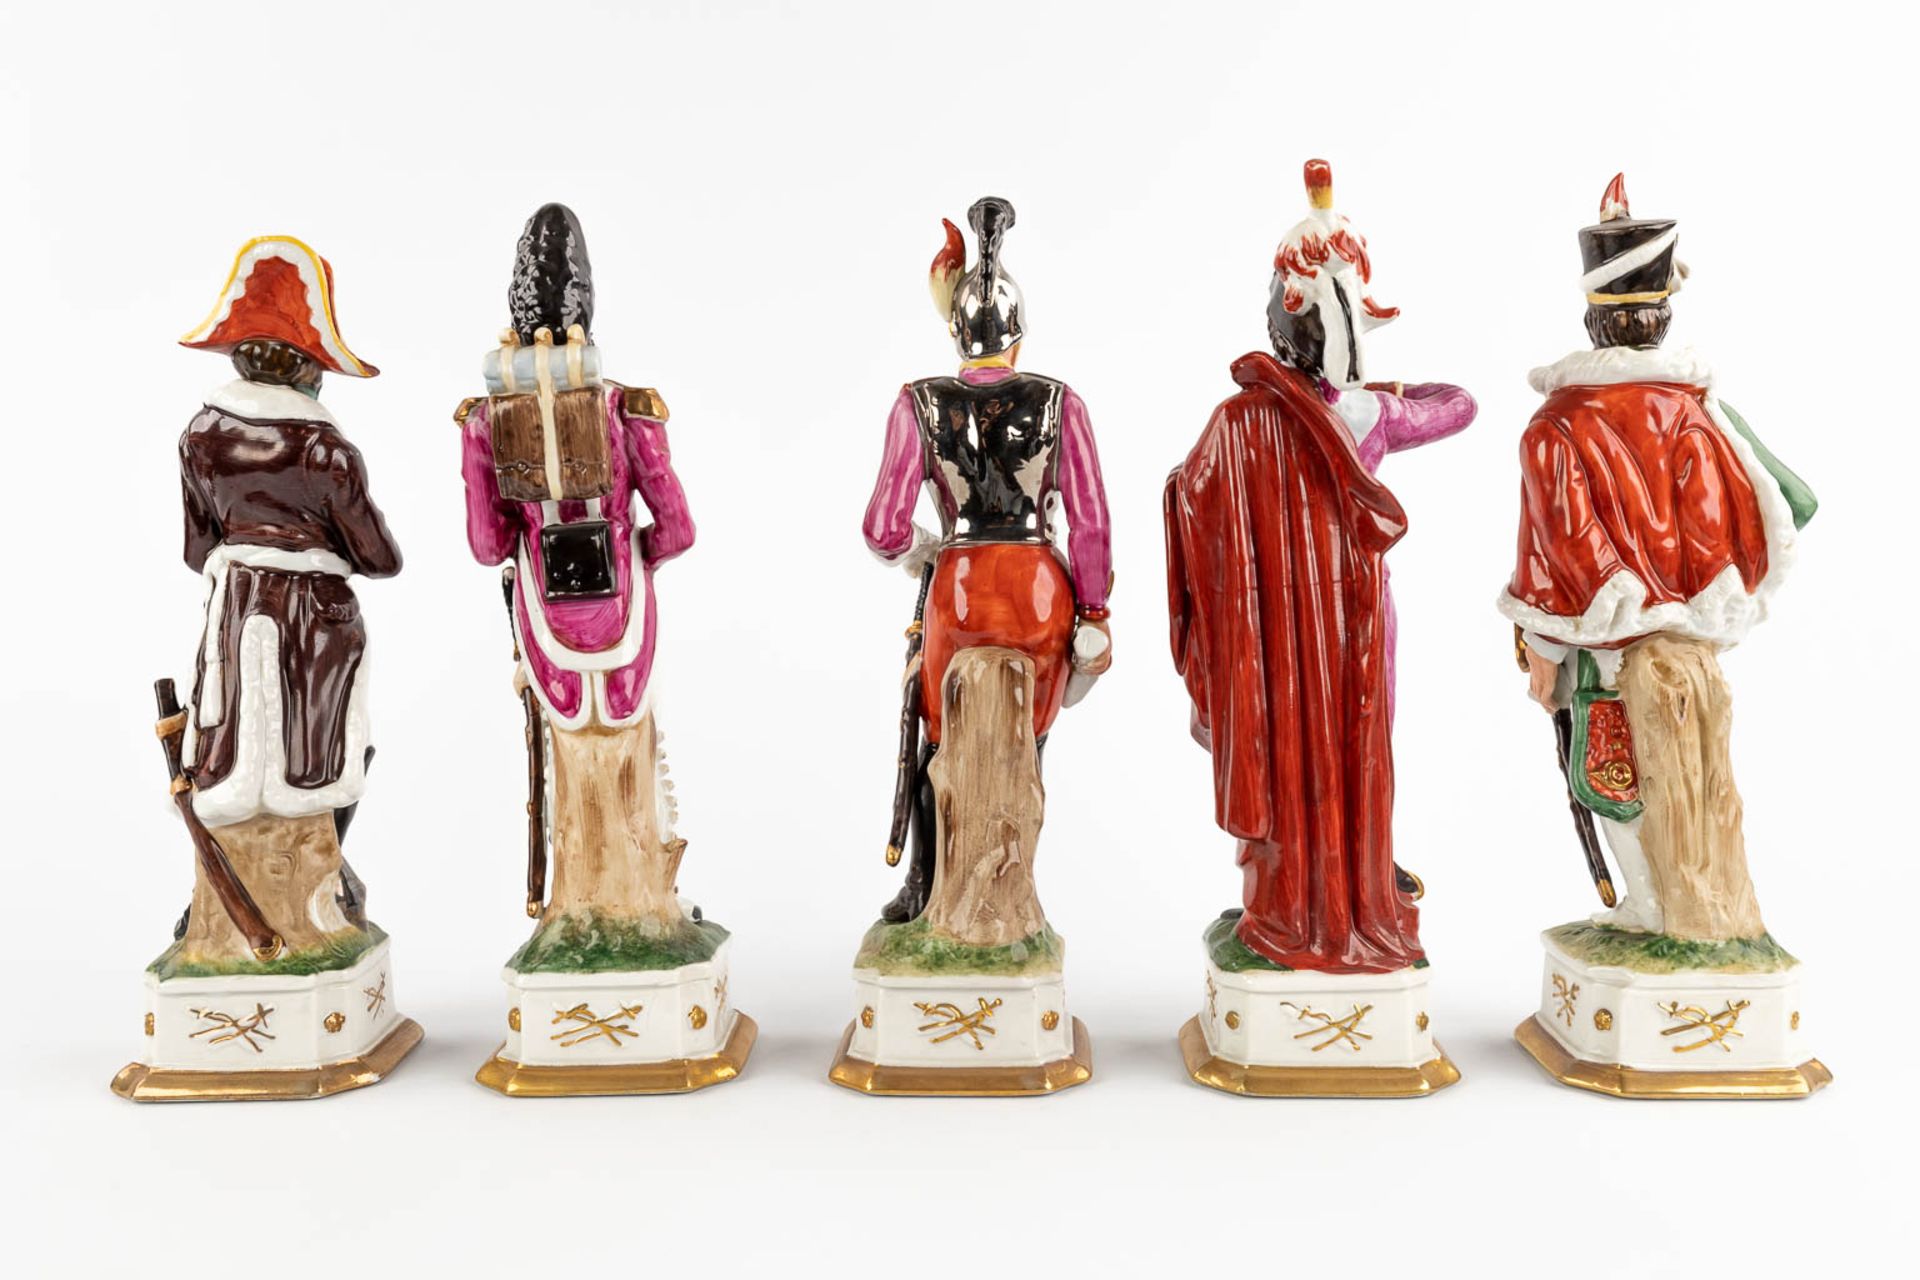 Napoleon and 9 generals, polychrome porcelain. 20th C. (H:32 cm) - Image 8 of 15